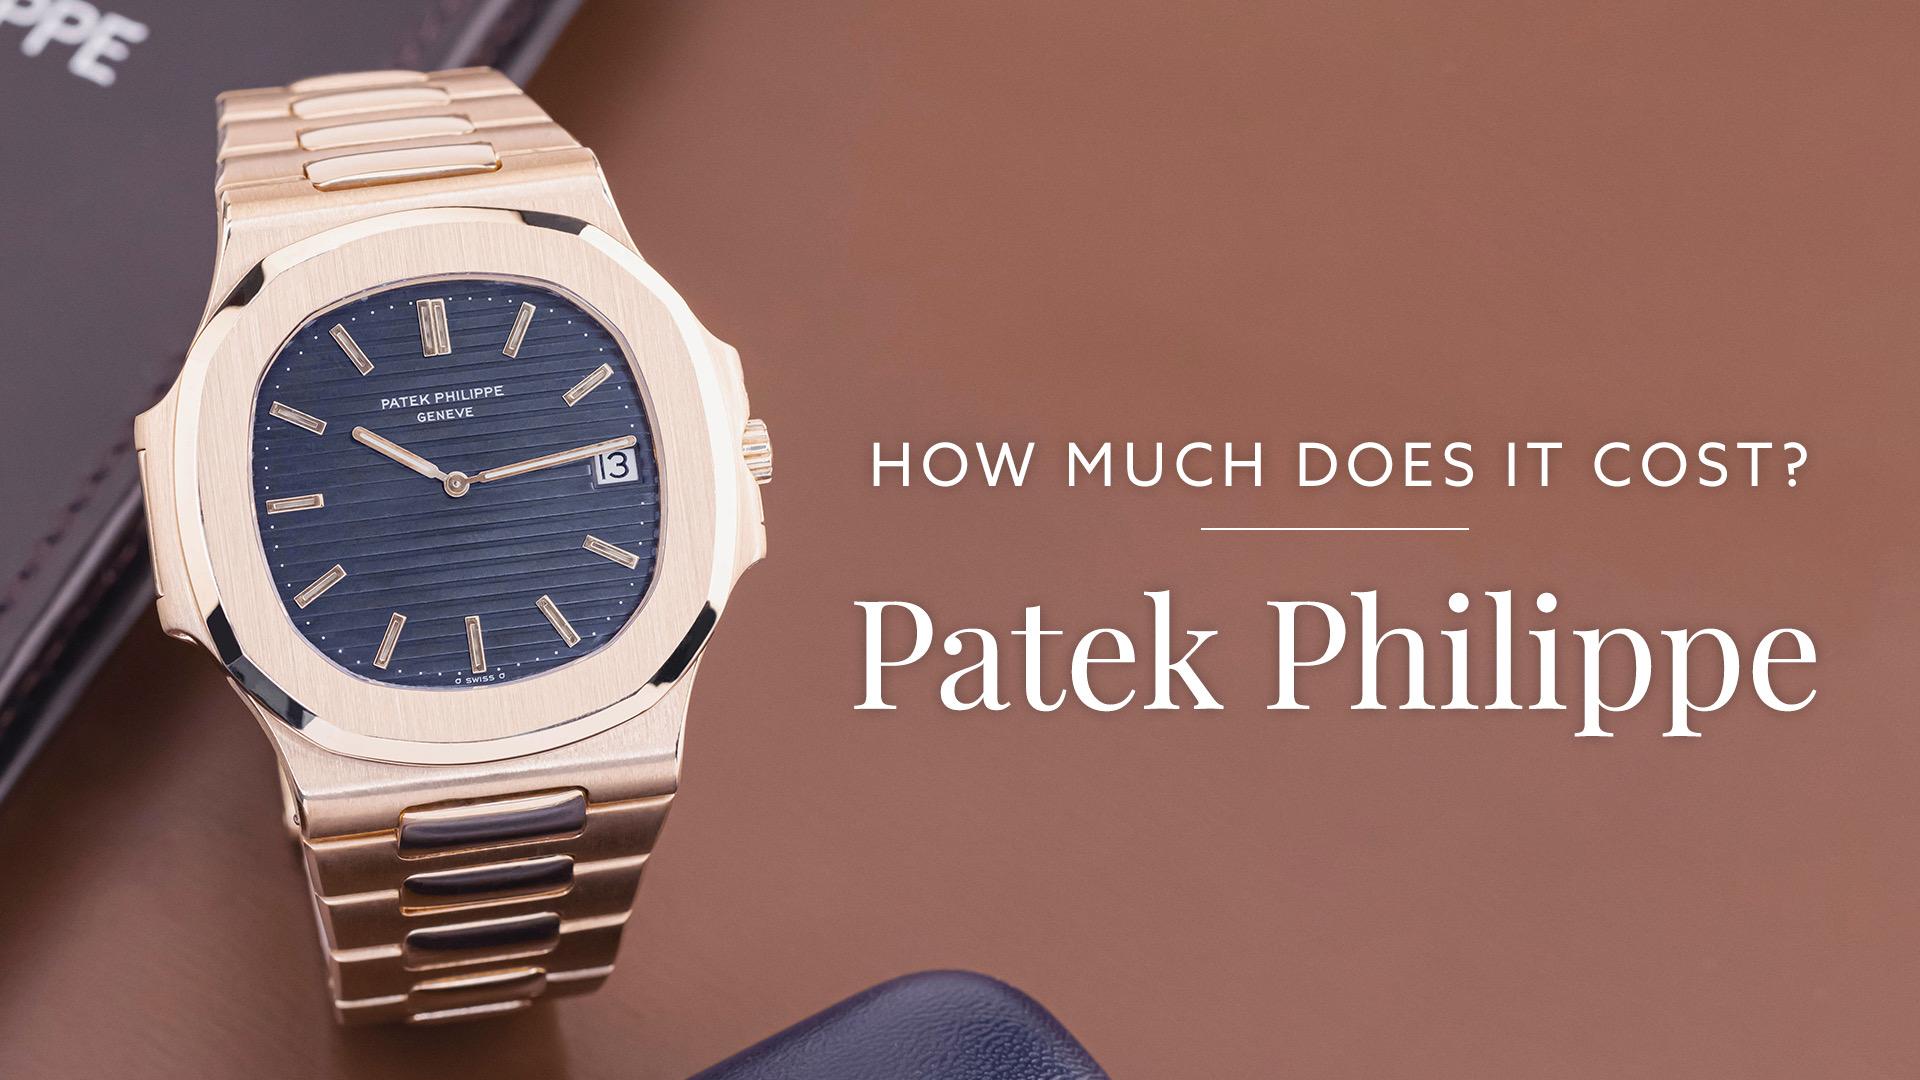 Green Patek Philippe 5711 sells for $376,000 USD